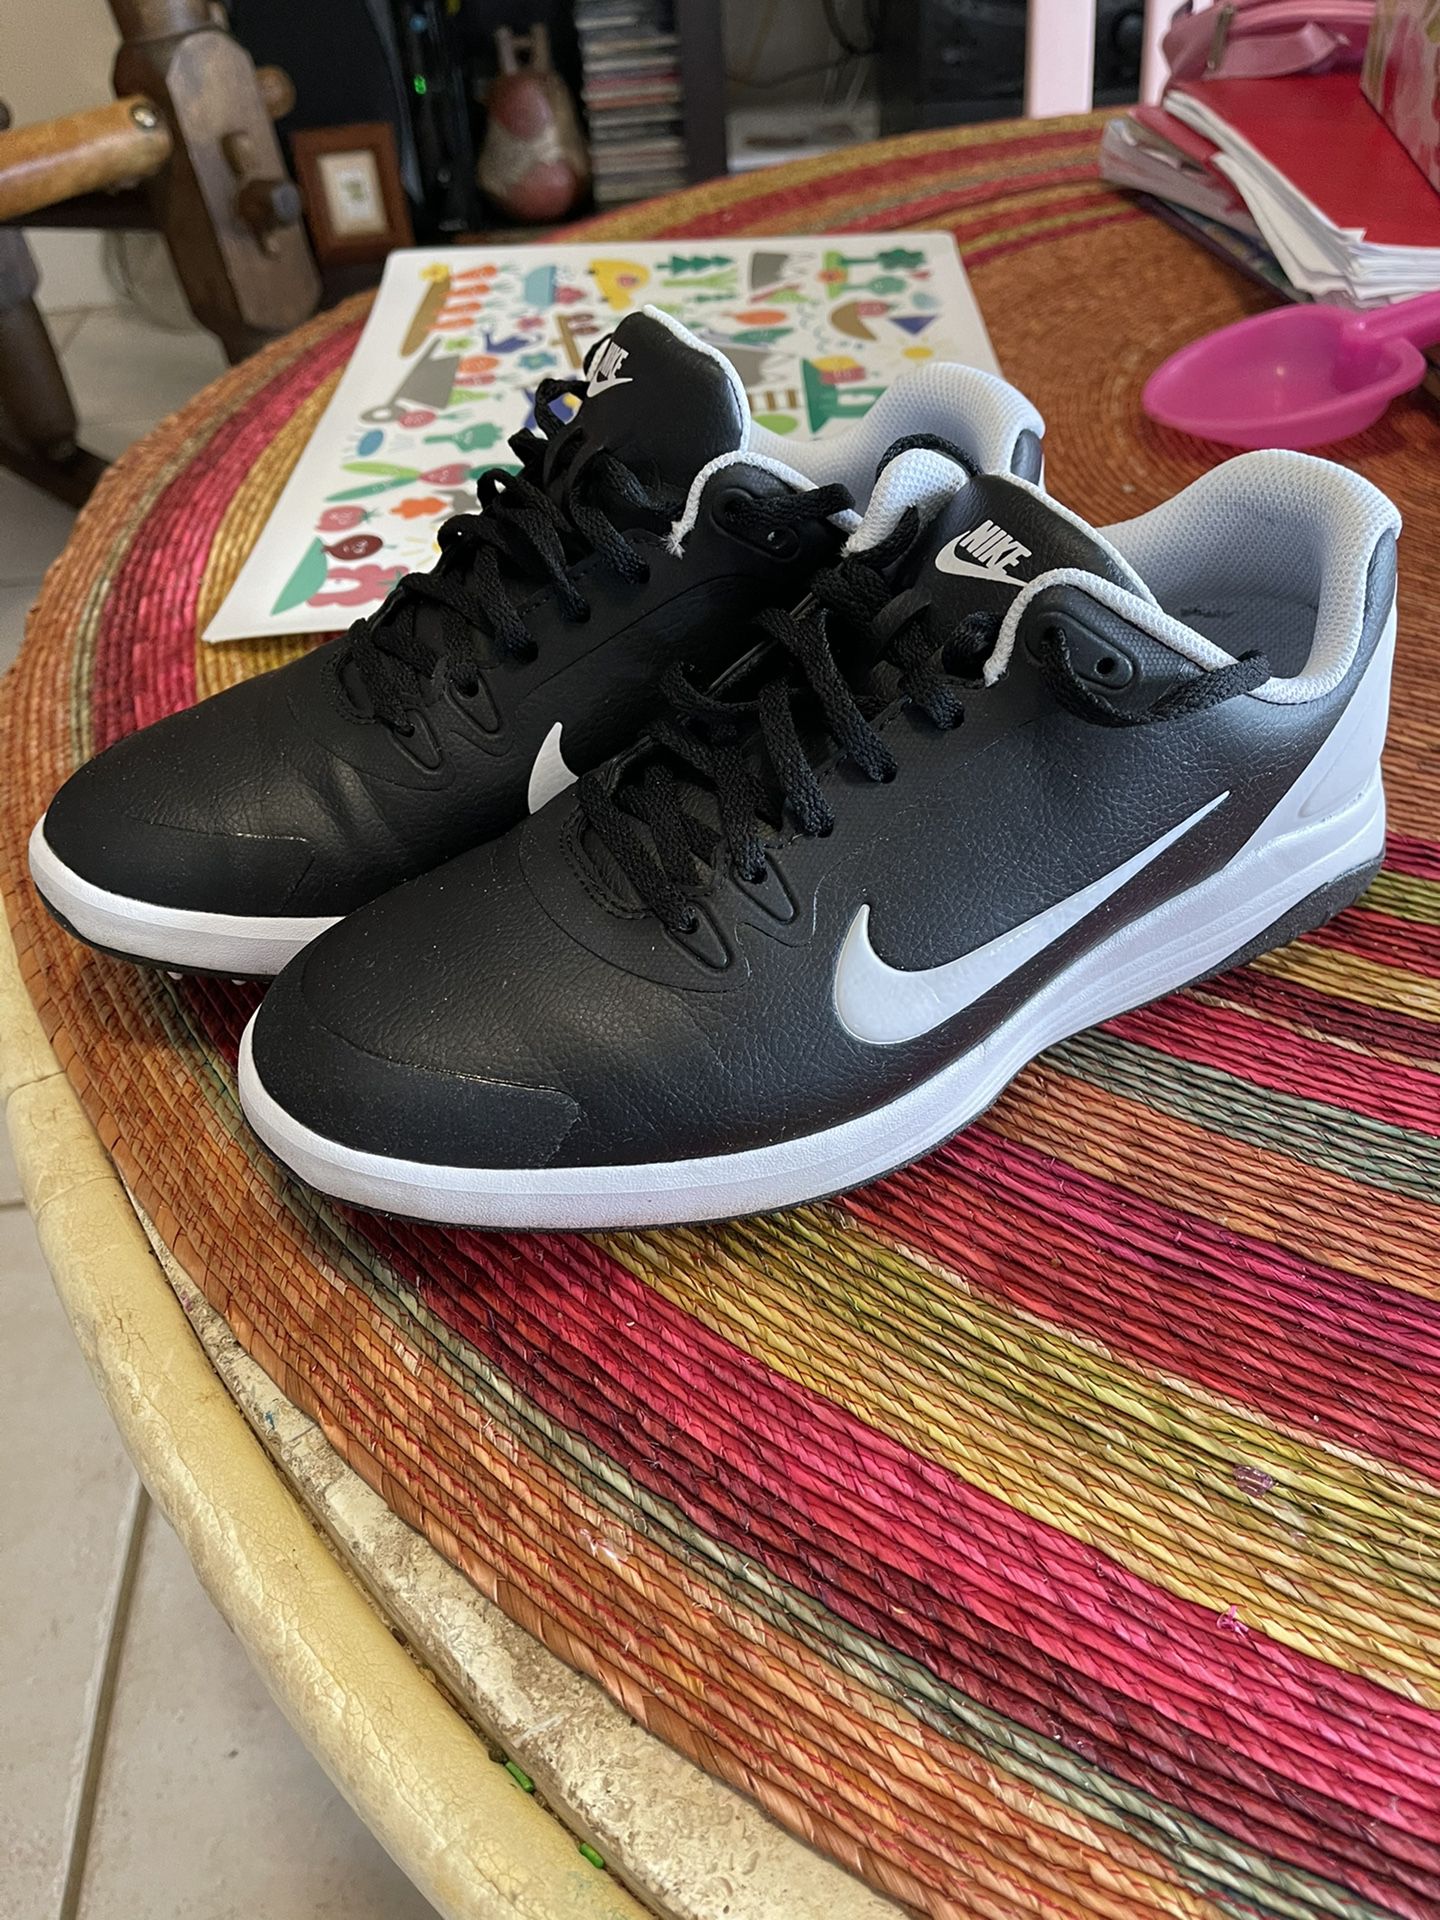 Nike Fitsole Golf Shoes Men 8.5 for Sale in FL - OfferUp